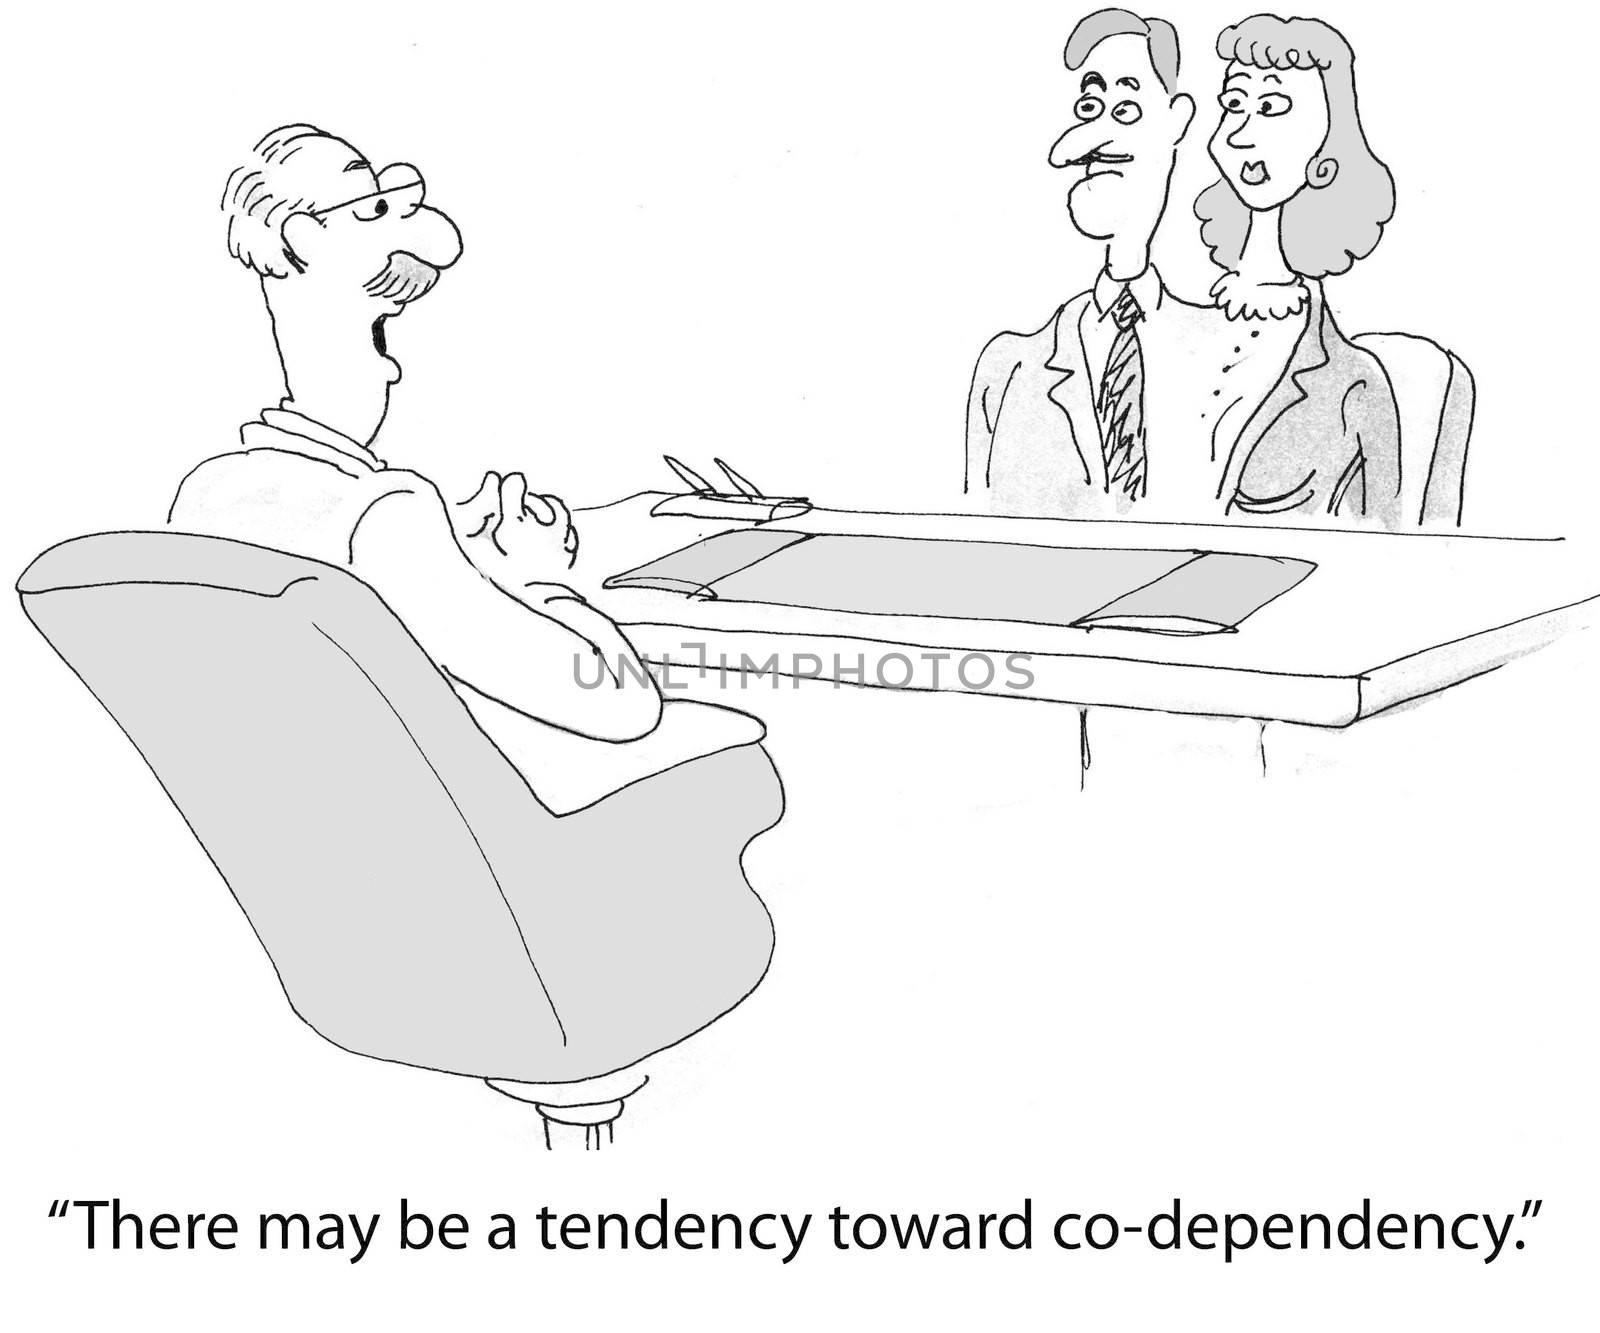 "You may have a tiny bit of co-dependency."